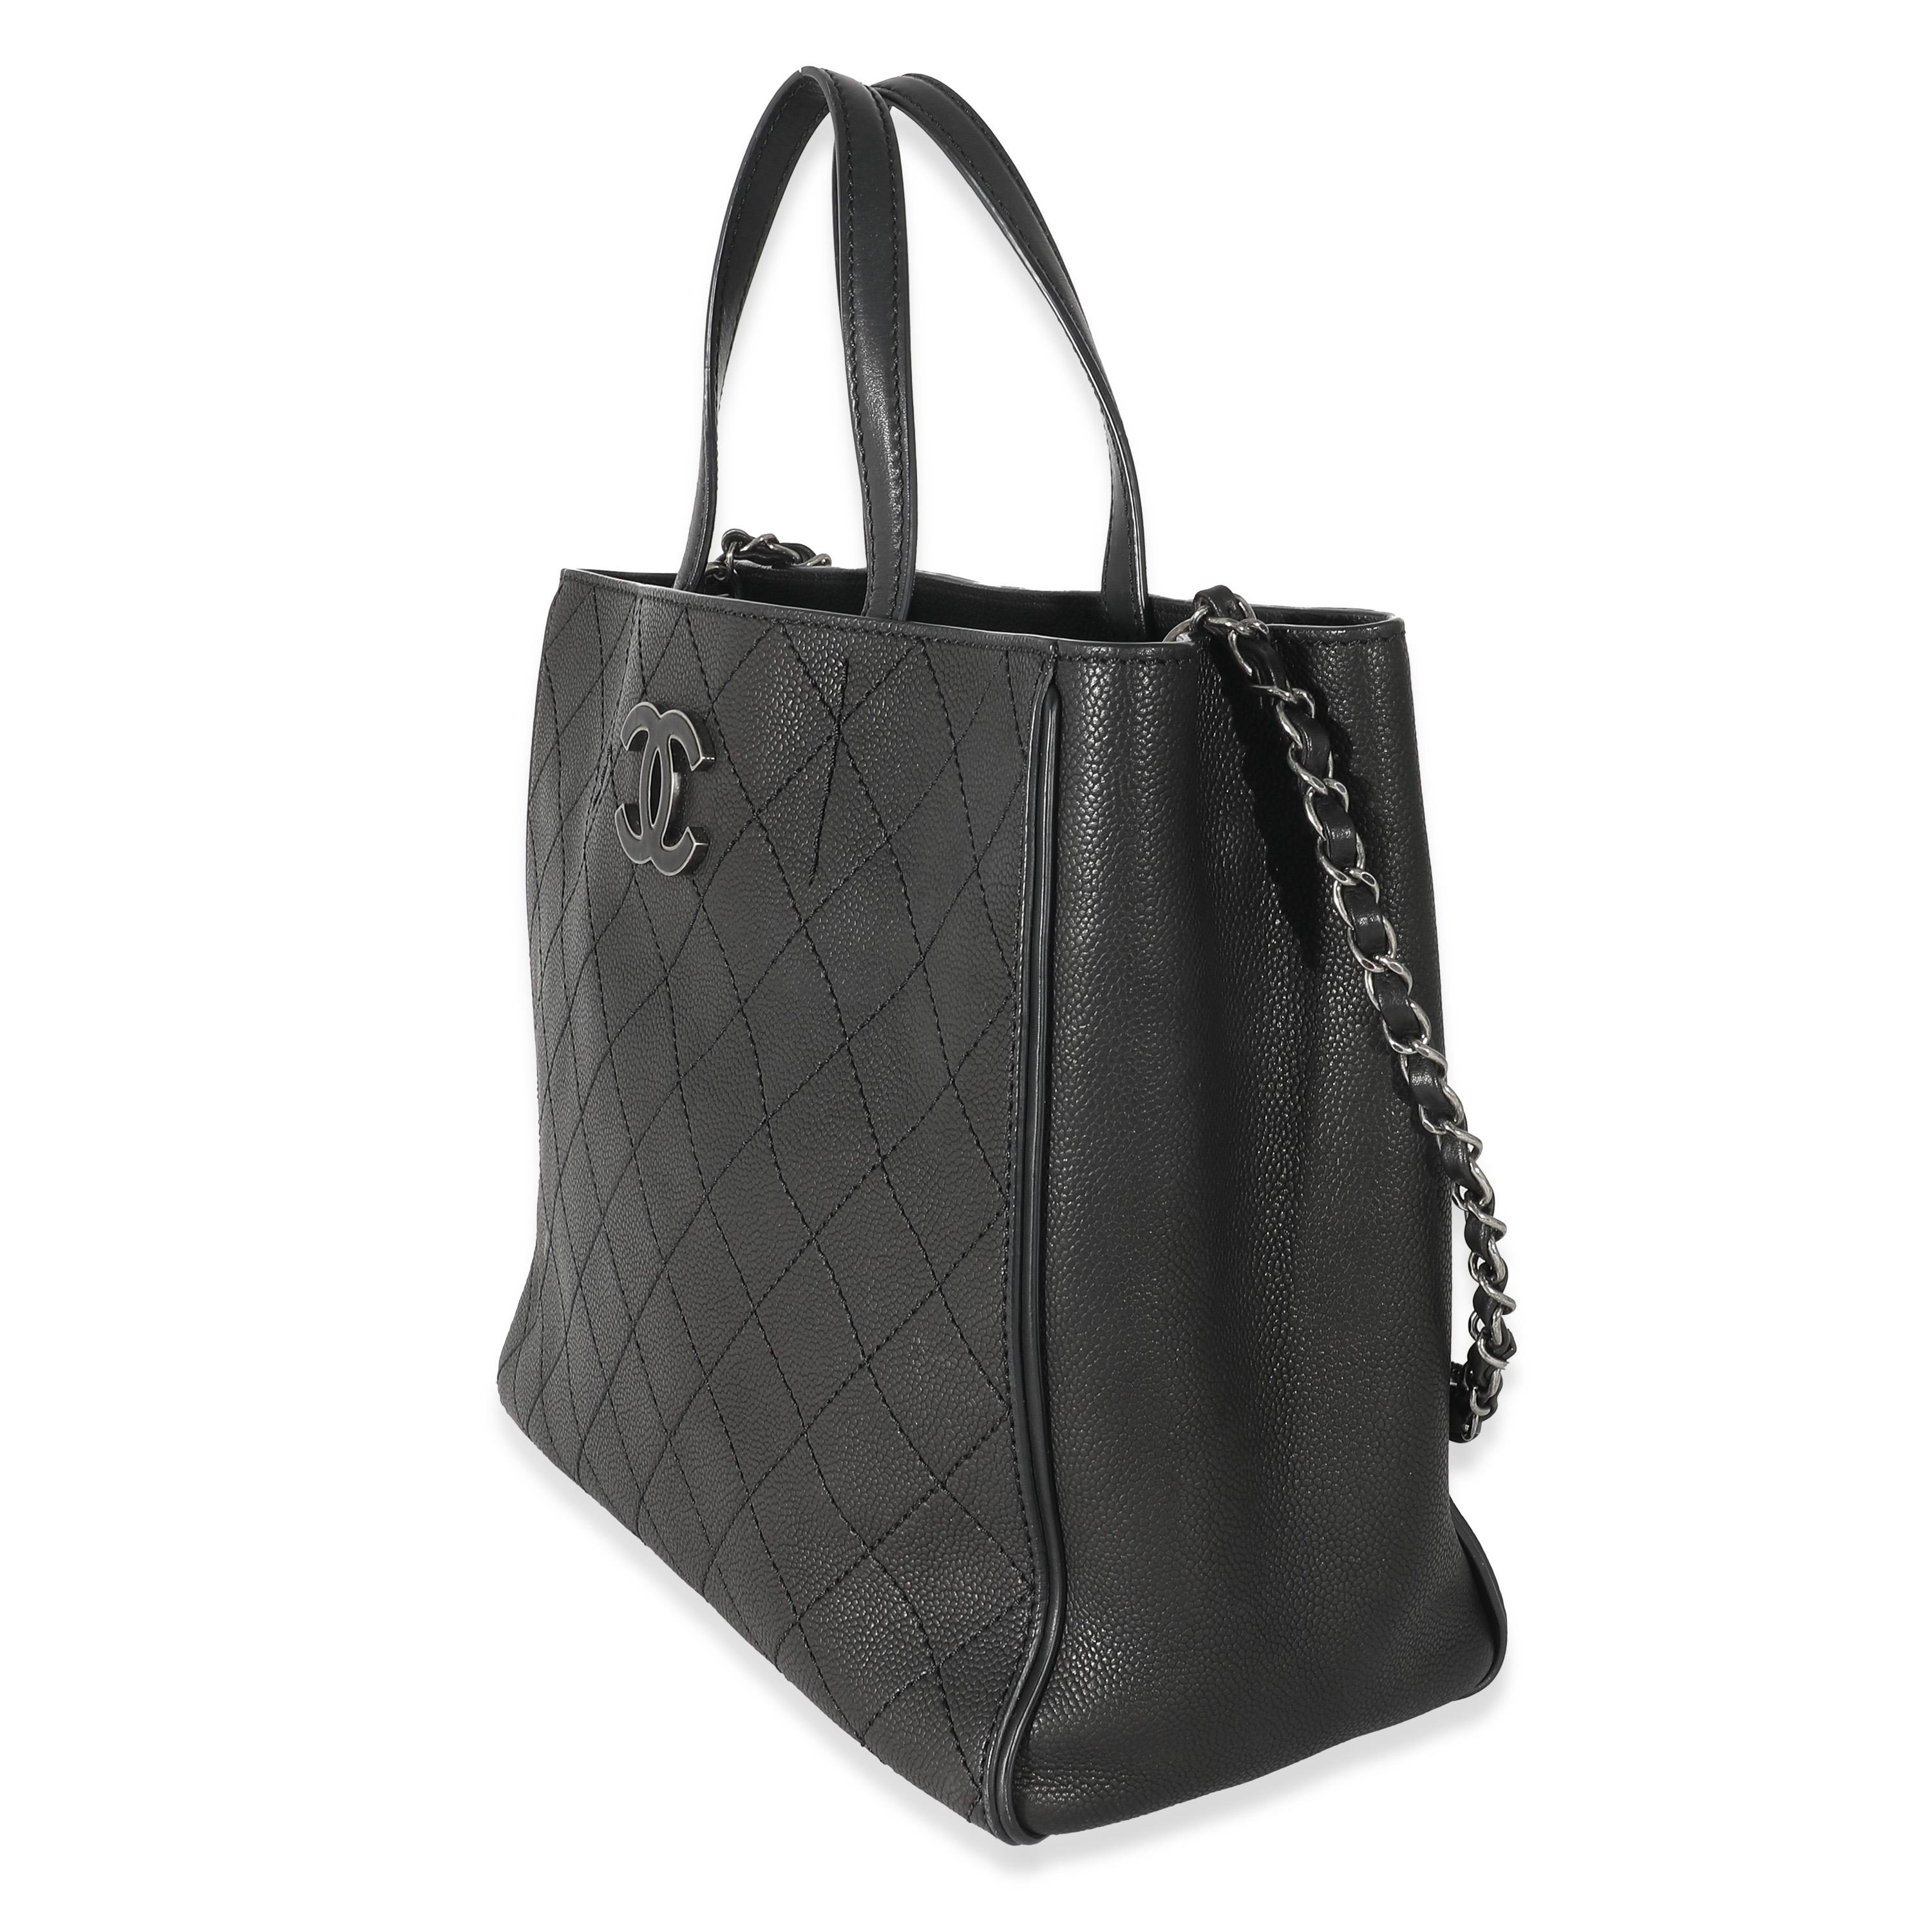 Women's or Men's Chanel Black Stitched Grained Calfskin Hamptons Tote